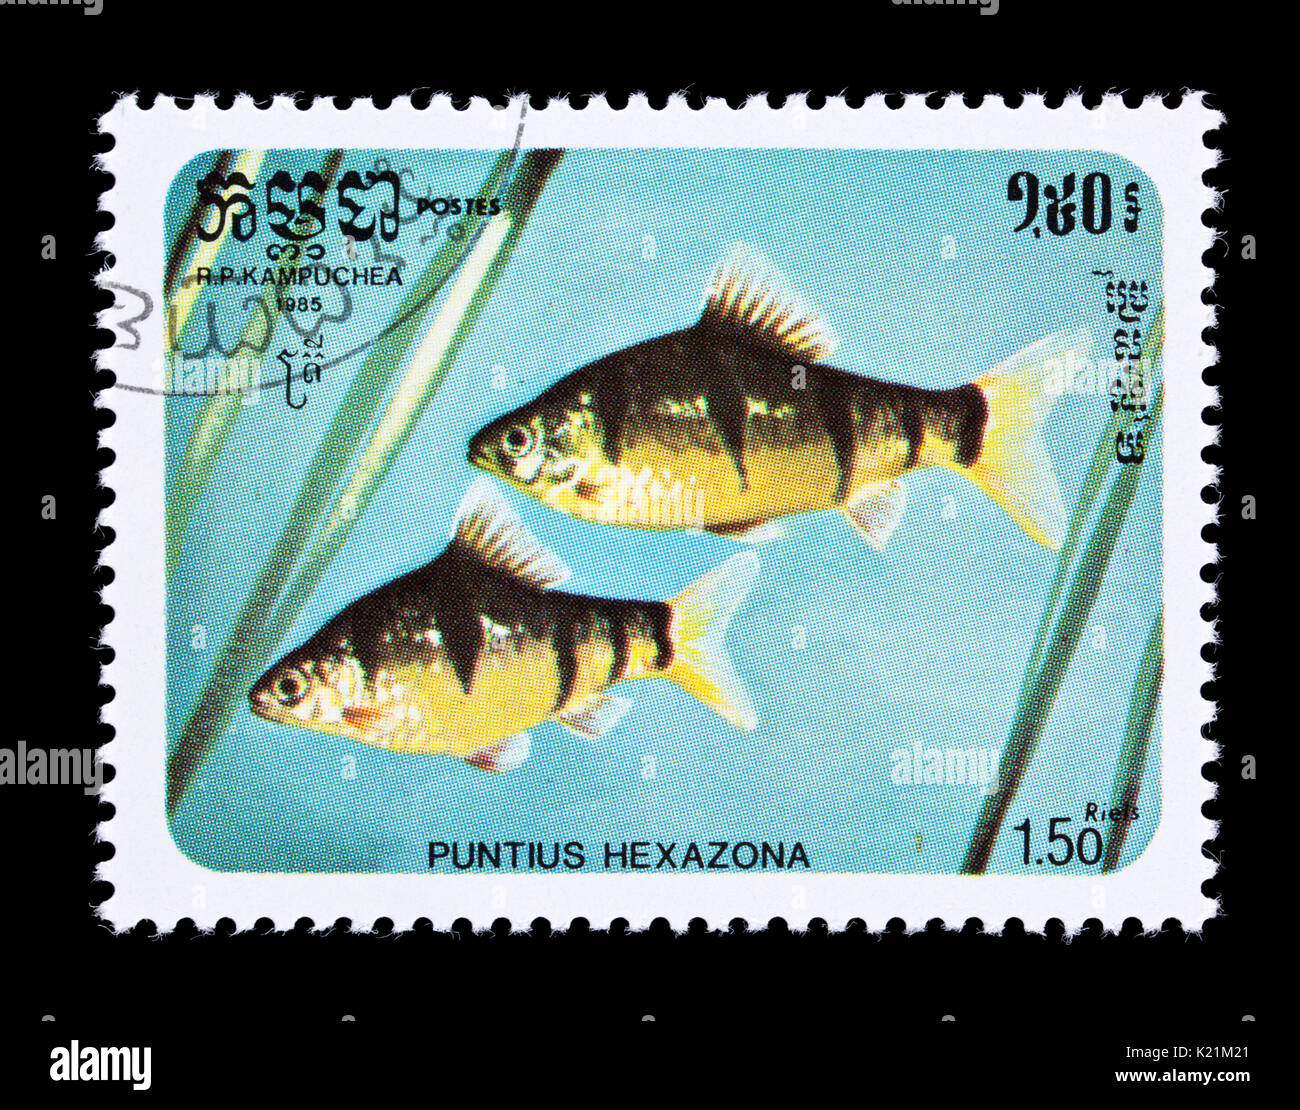 Postage stamp from Cambodia (Kampuchea) depicting a six-banded tiger barb (Desmopuntius hexazona) Stock Photo